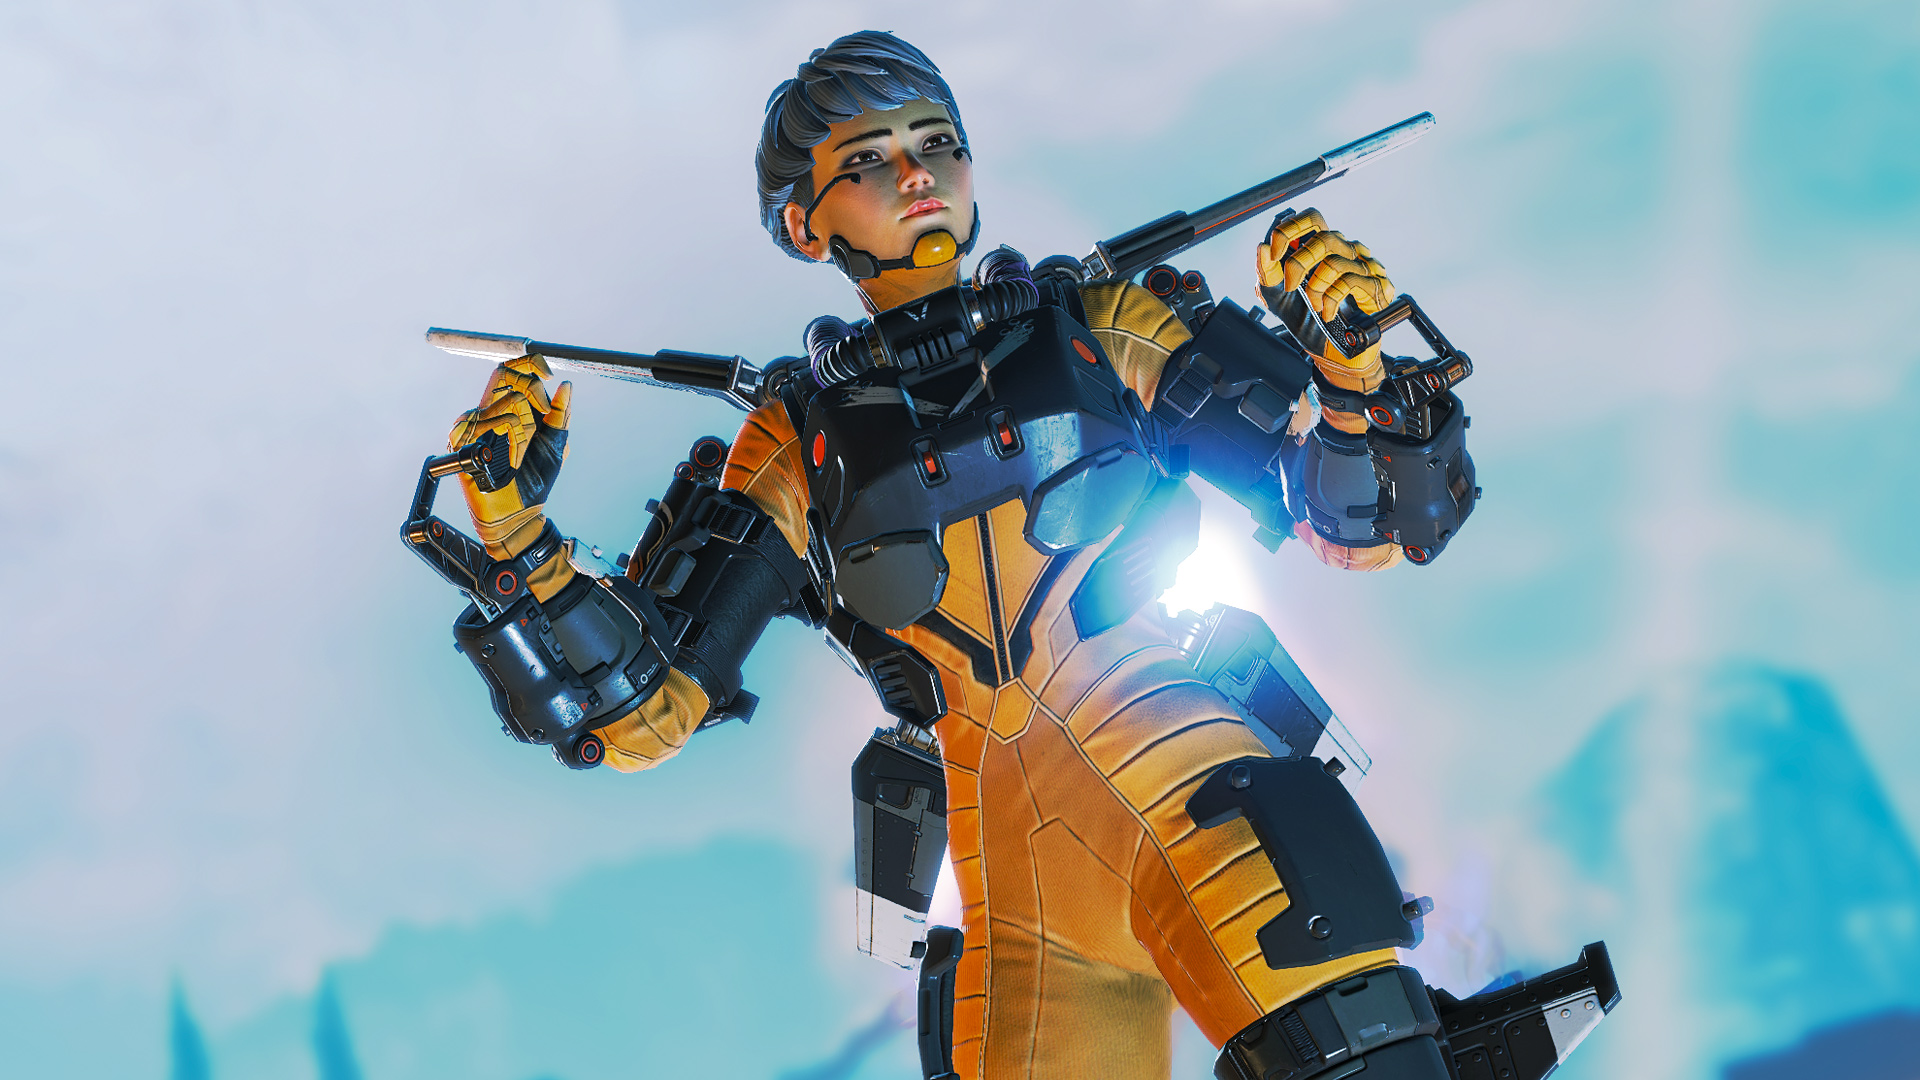  Respawn pushes new patch for Apex Legends' recent lag issues
 